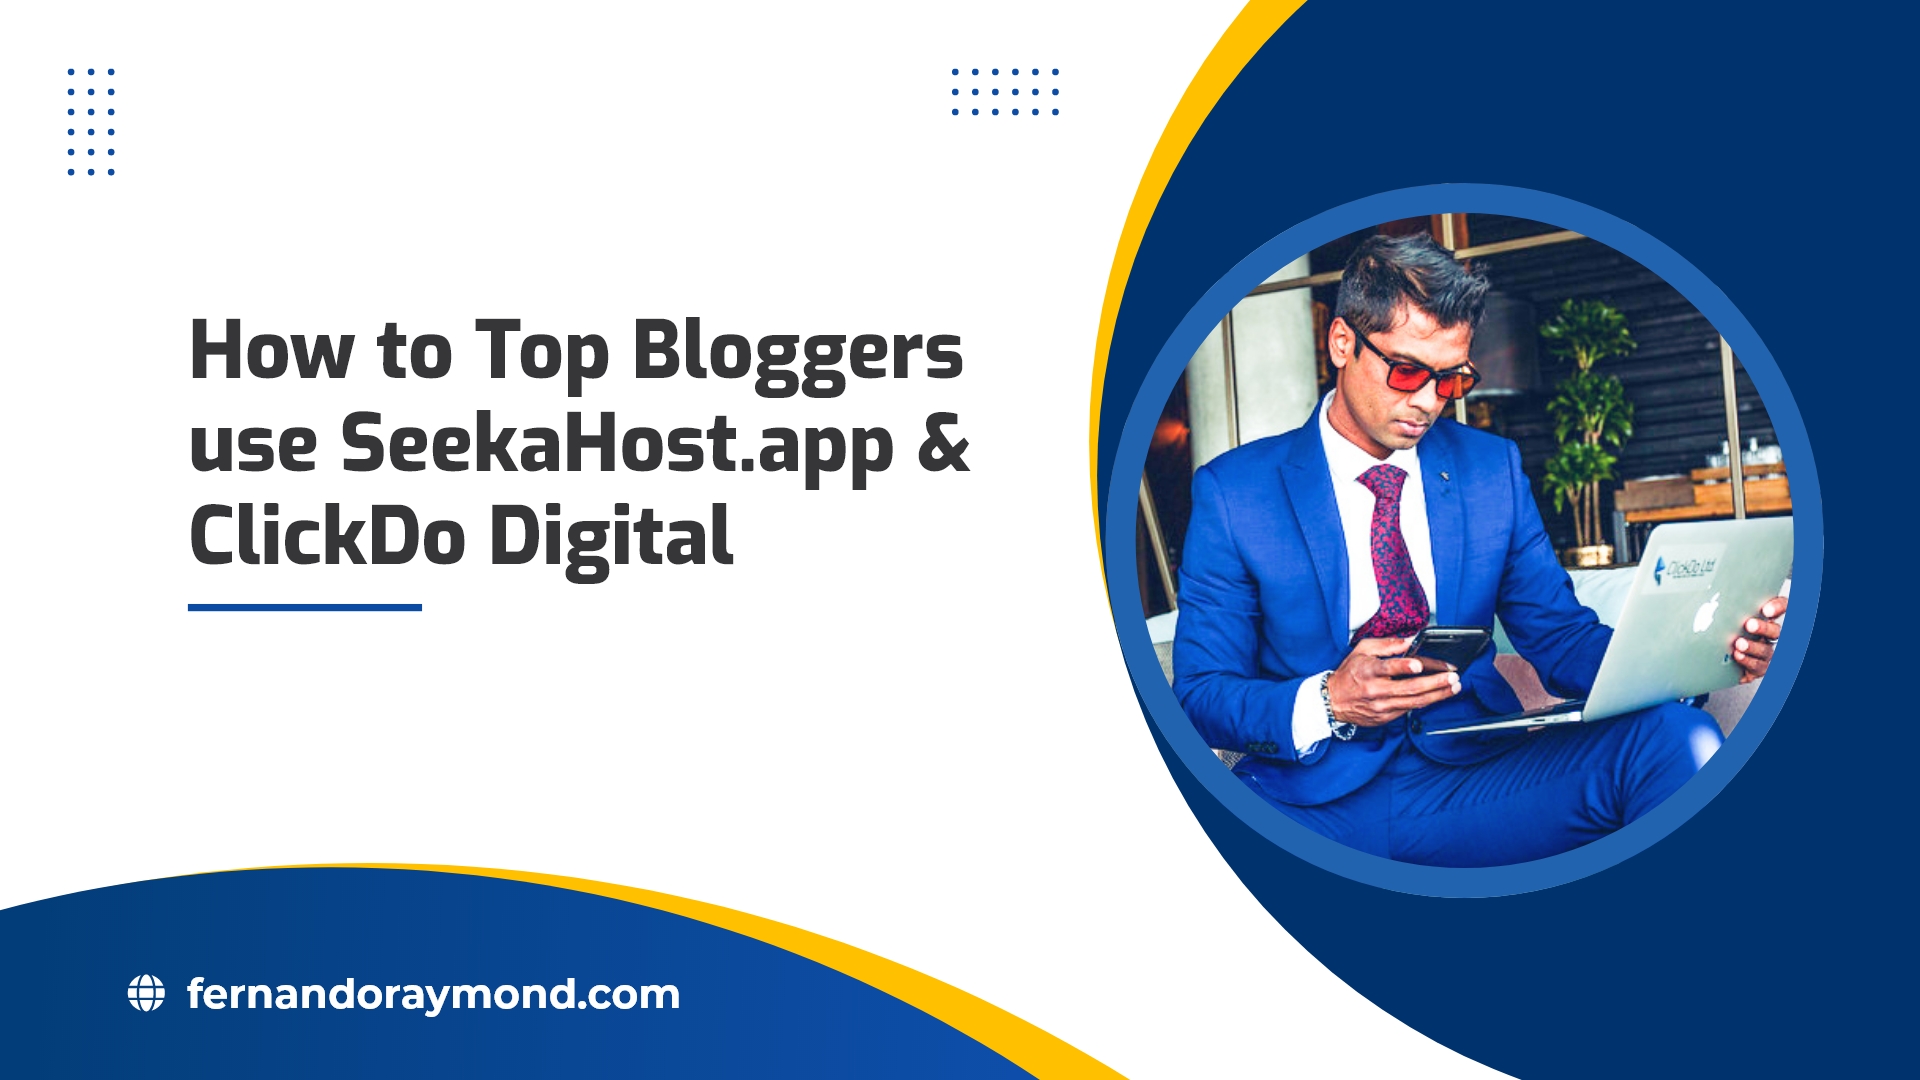 7 Ways Top Bloggers use SeekaHost.app with ClickDo Digital PR to Grow their Blog